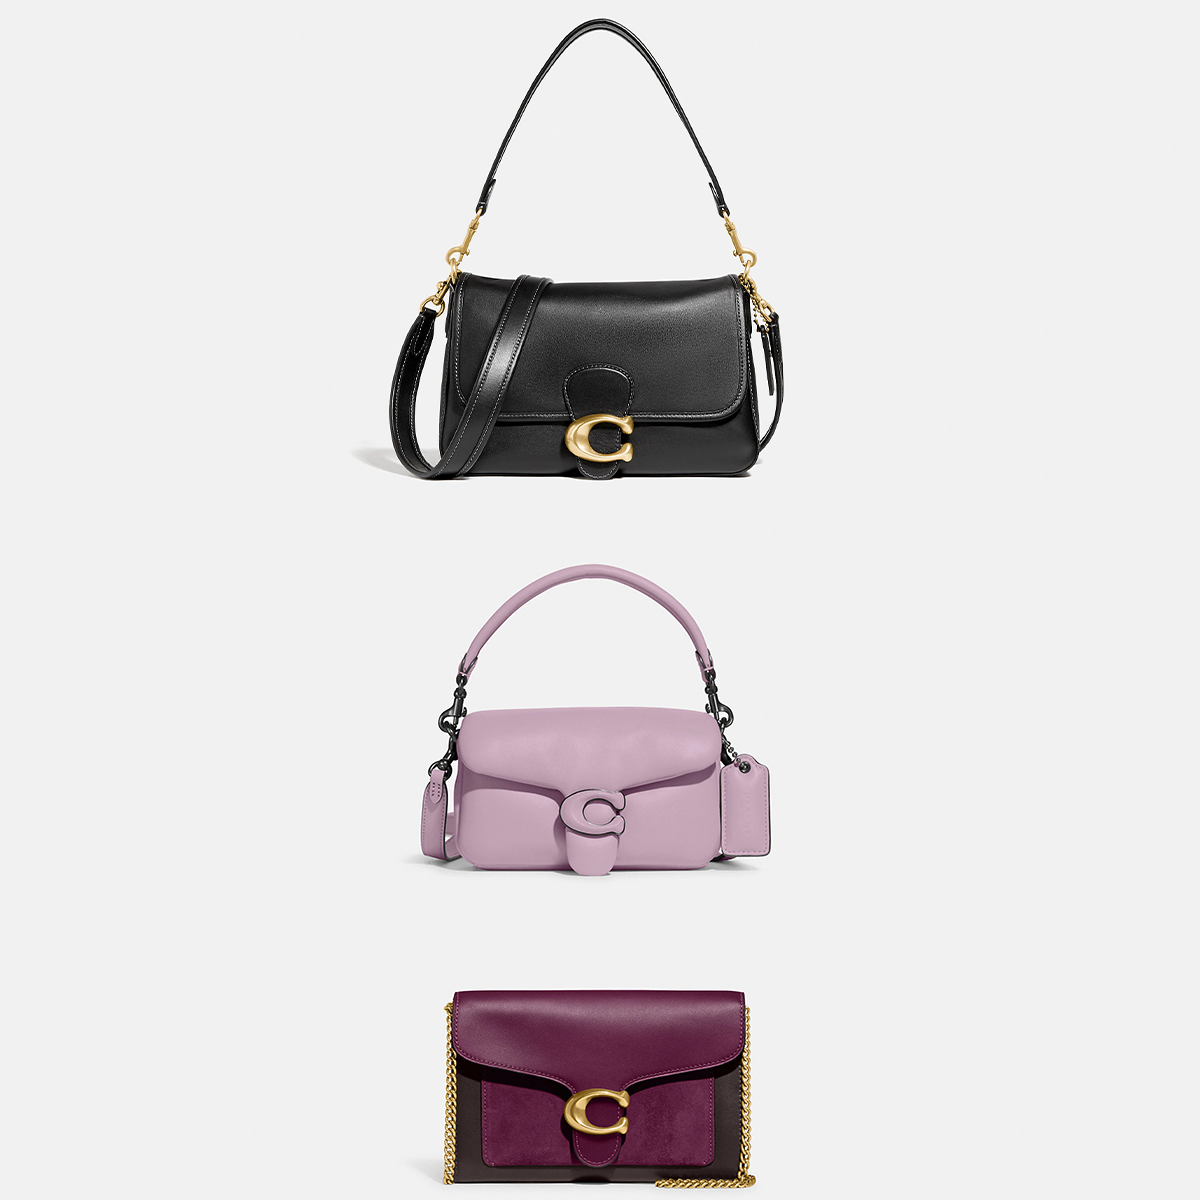 Coach Cyber Monday Sale: Get a $395 Tote Bag for $199 & More Deals for up to 50% Off – E! Online